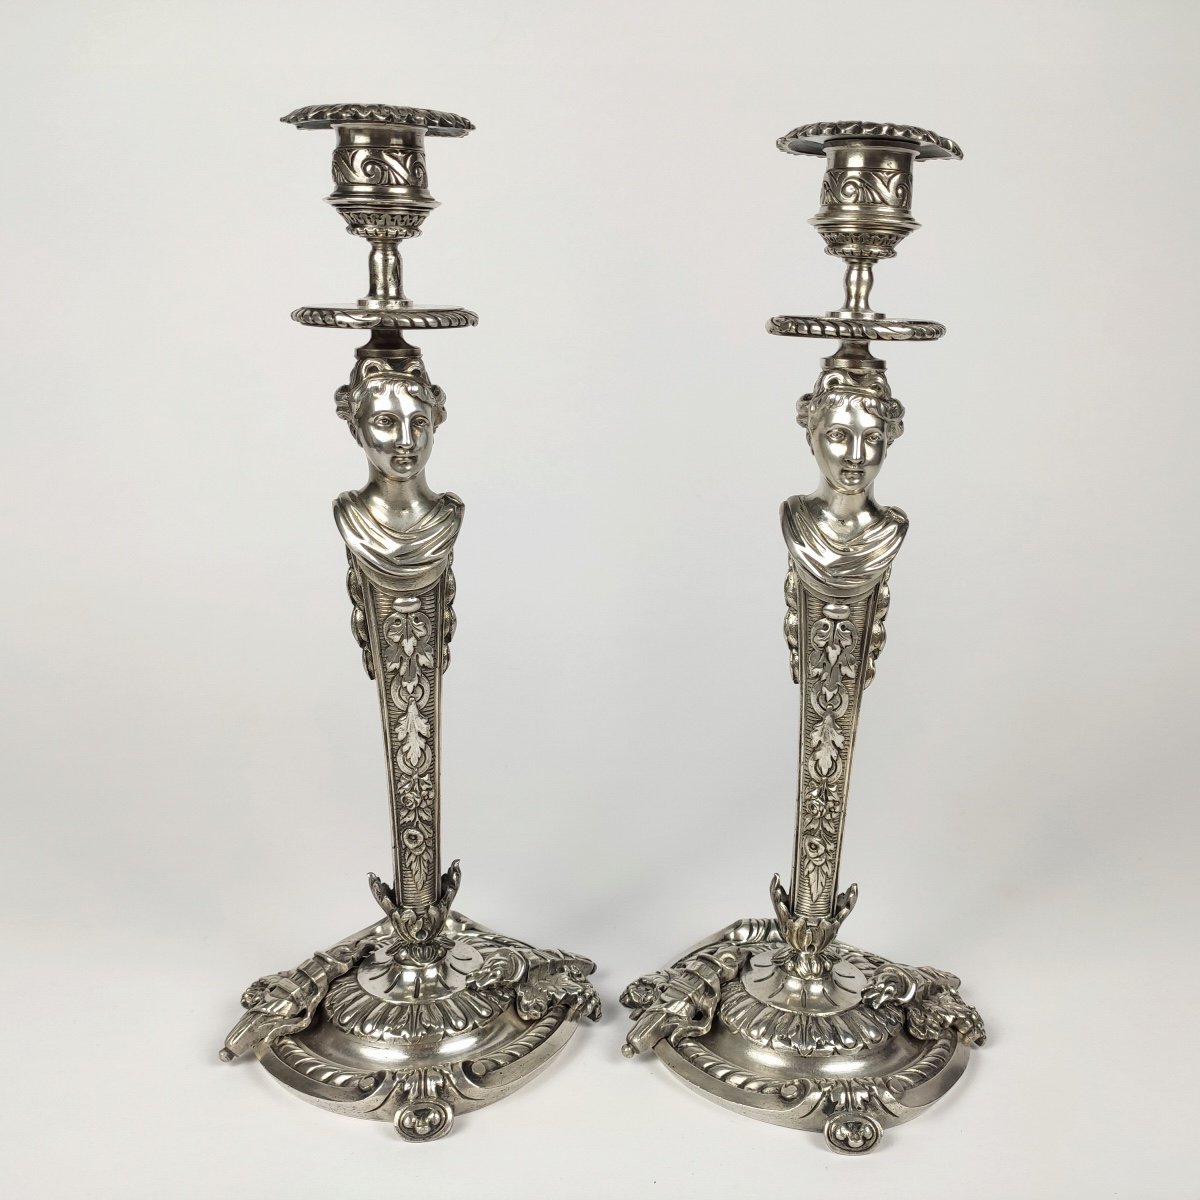 Superb Pair Of Candlesticks In Silvered Bronze, Women In Terms, Antique Style. Nineteenth Century.-photo-2